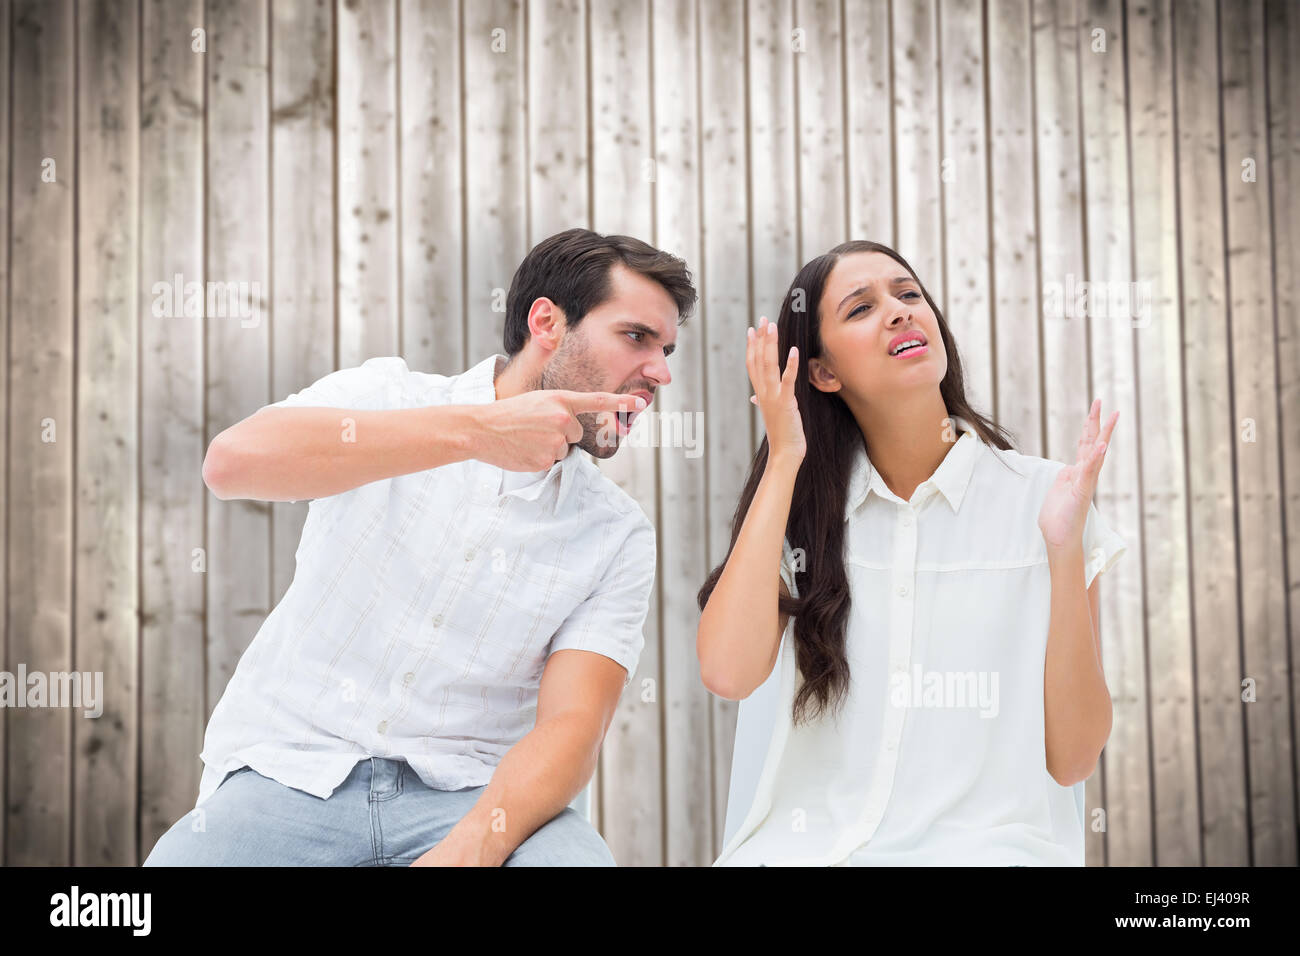 Composite image of couple sitting on chairs arguing Stock Photo